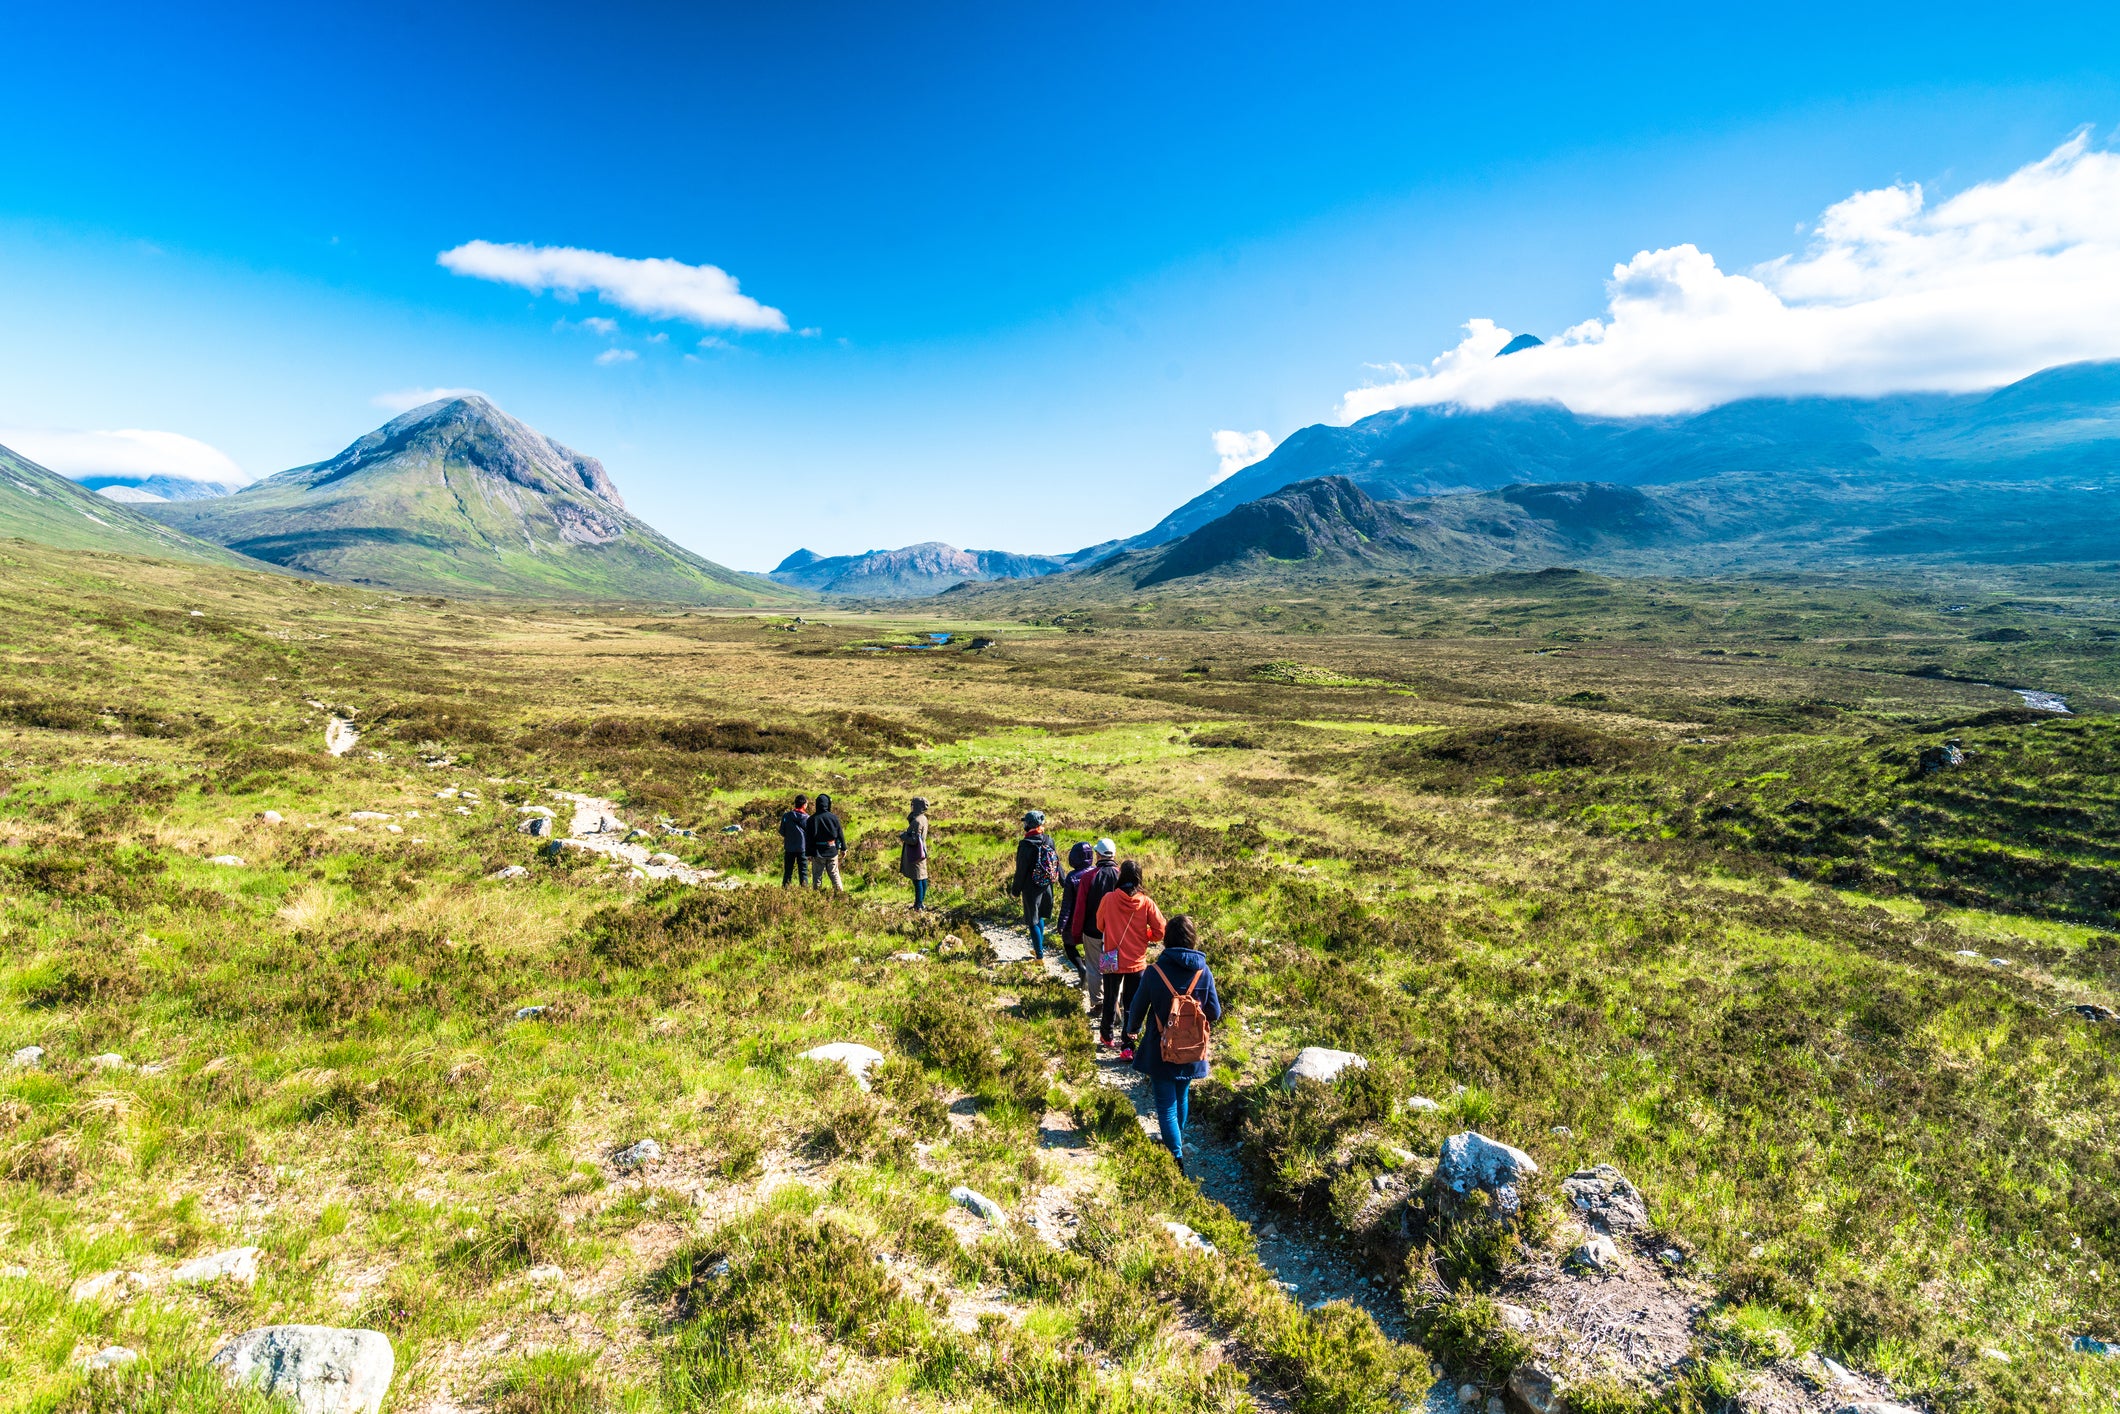 Hike through the spectacular scenery of the UK’s northernmost country